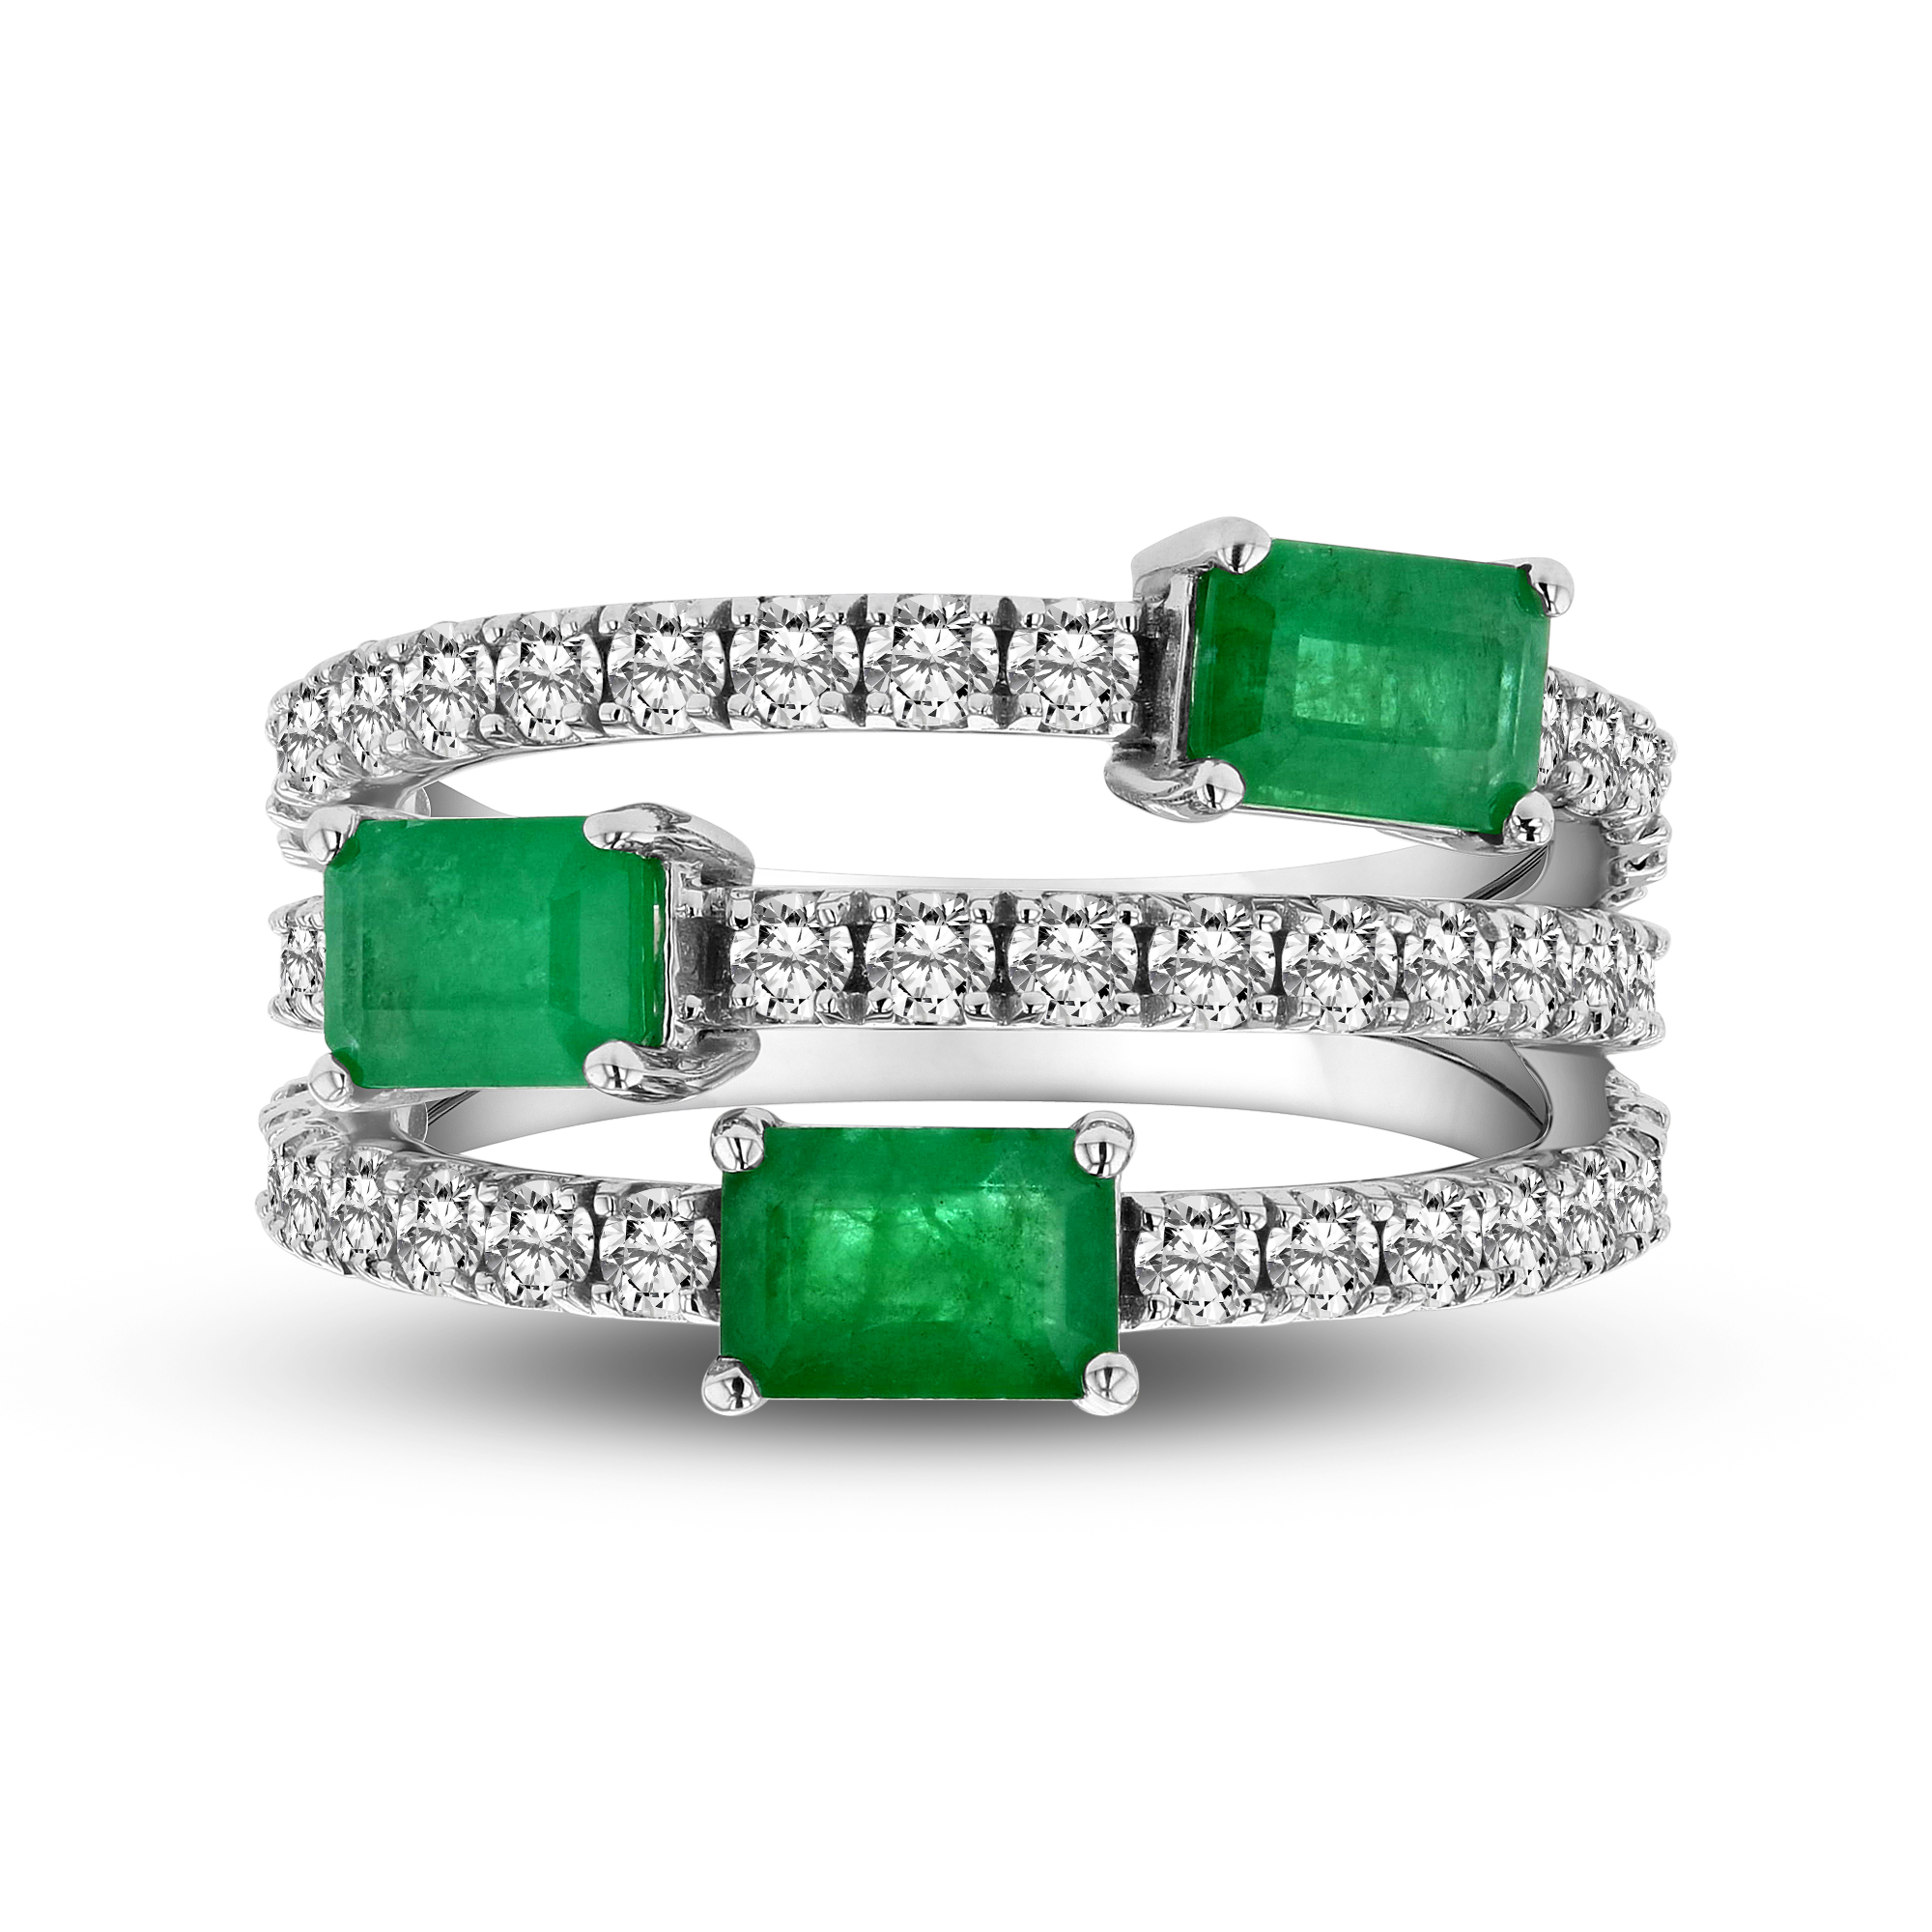 View 3.03ctw Diamonds and Emerald Fashion Ring in 14k White Gold